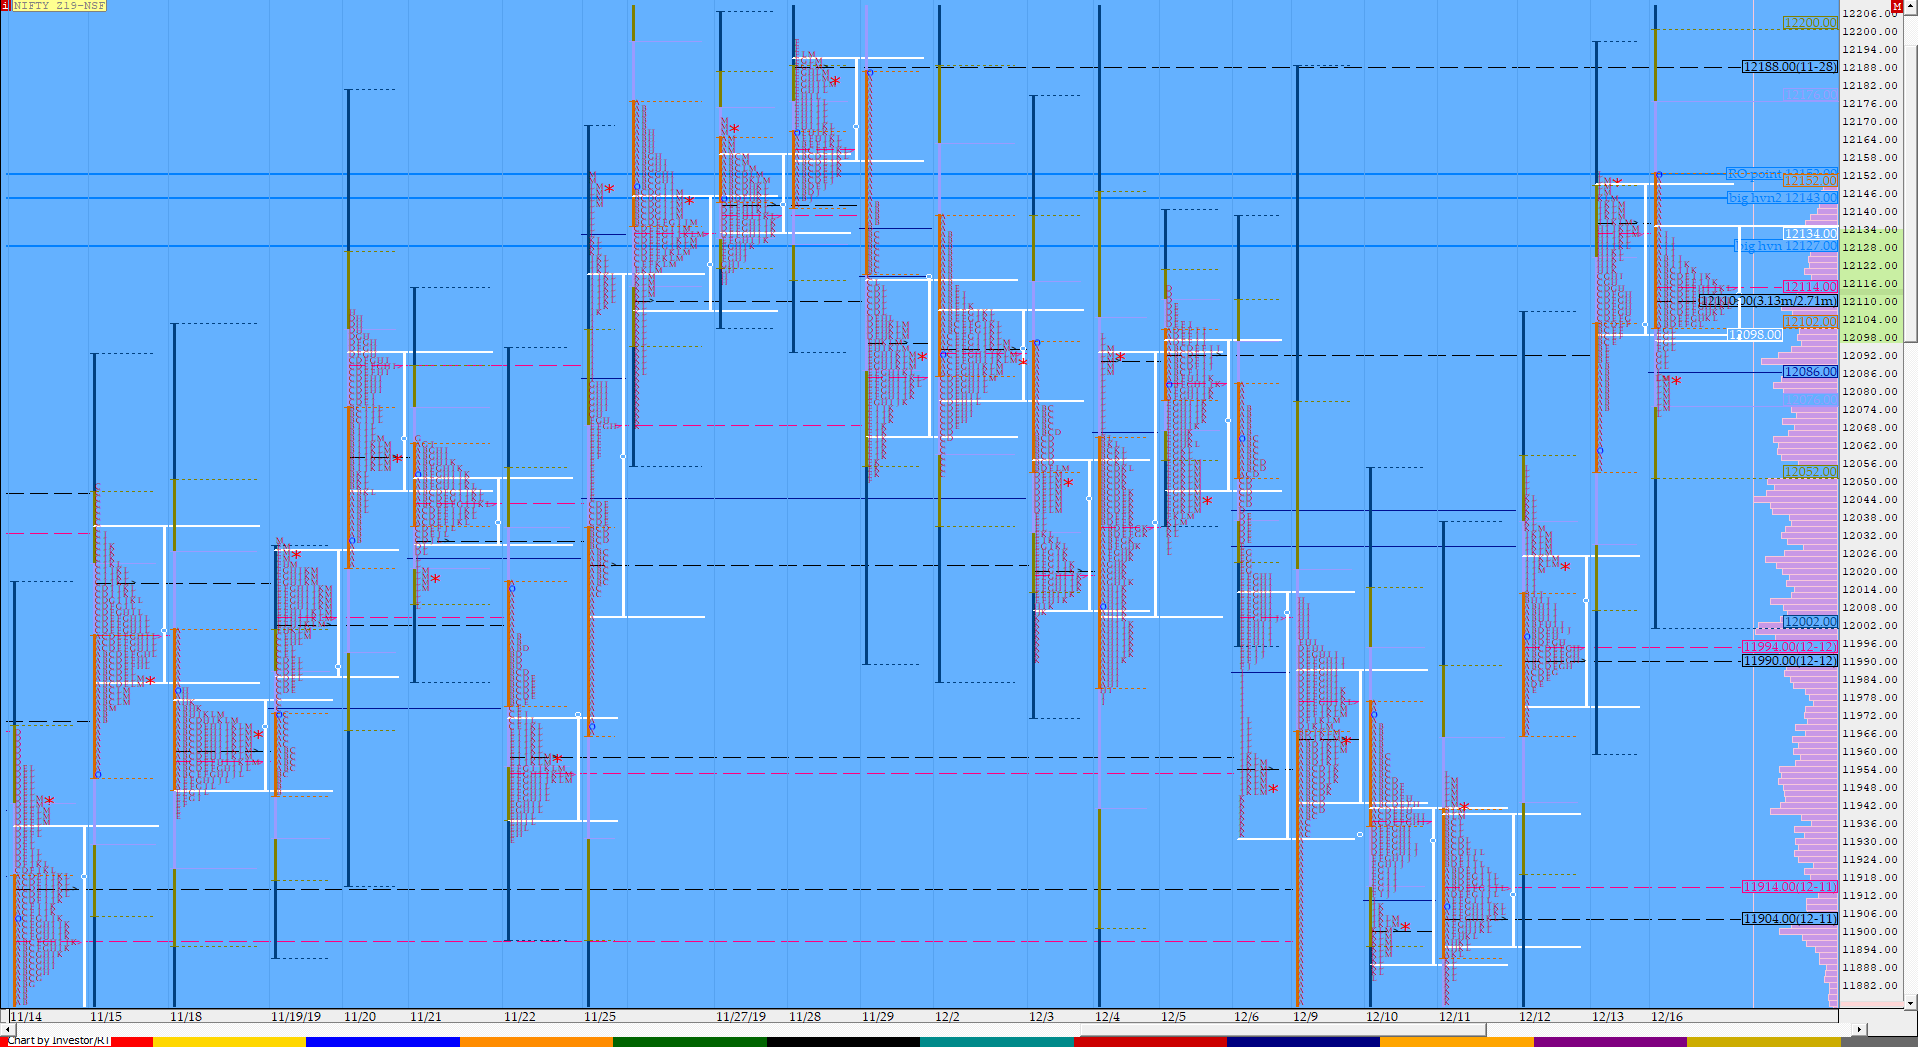 Nf Compo1 11 Market Profile Analysis Dated 16Th December Banknifty Futures, Charts, Day Trading, Intraday Trading, Intraday Trading Strategies, Market Profile, Market Profile Trading Strategies, Nifty Futures, Order Flow Analysis, Support And Resistance, Technical Analysis, Trading Strategies, Volume Profile Trading